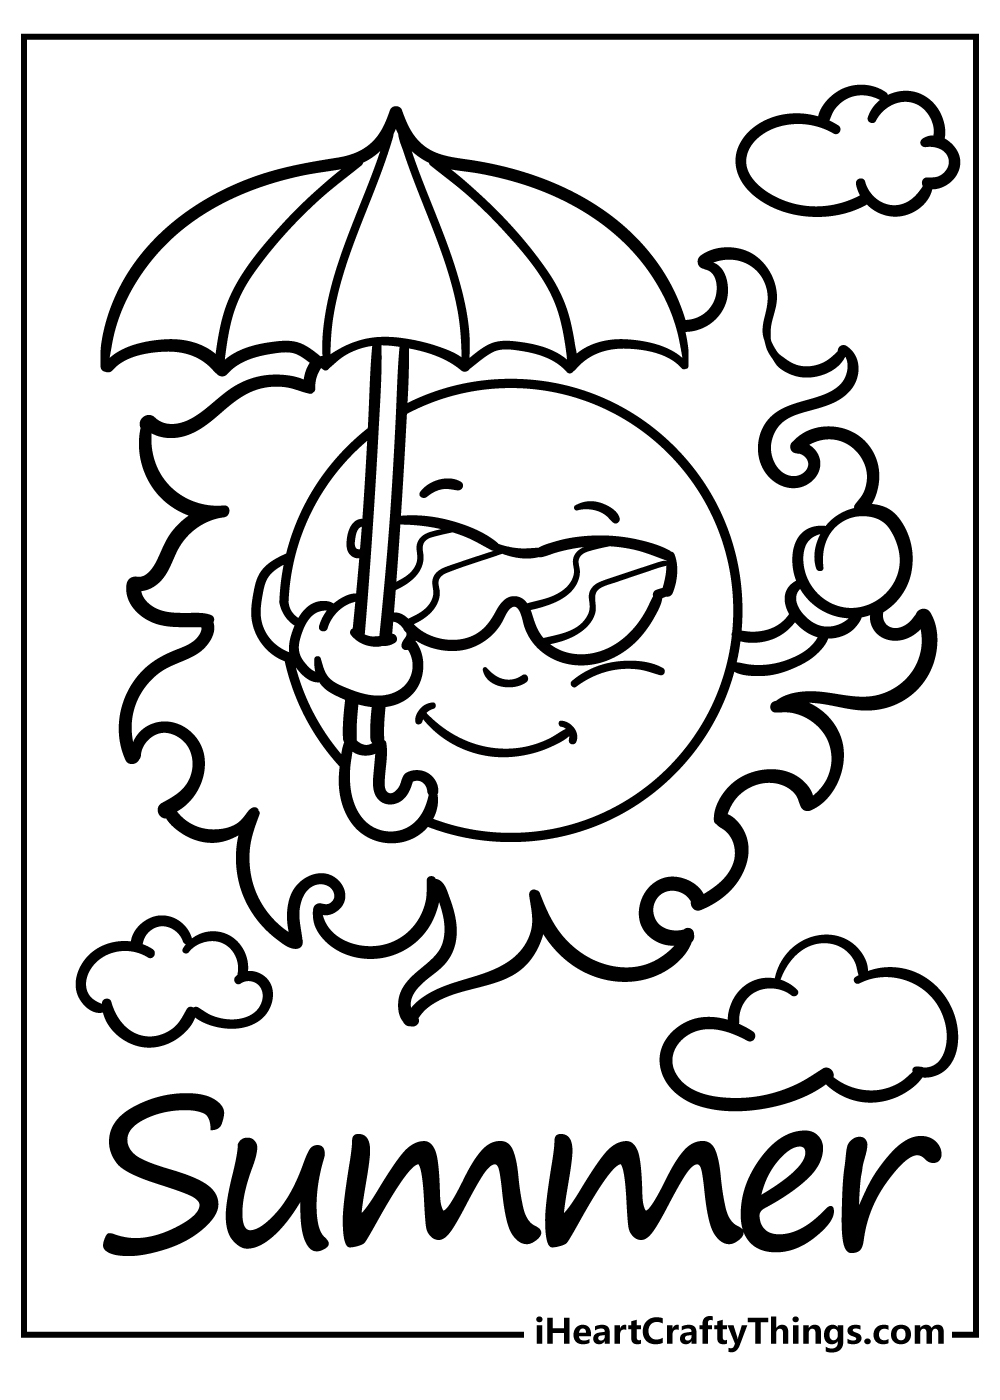 Summer Coloring Pages for preschoolers free printable